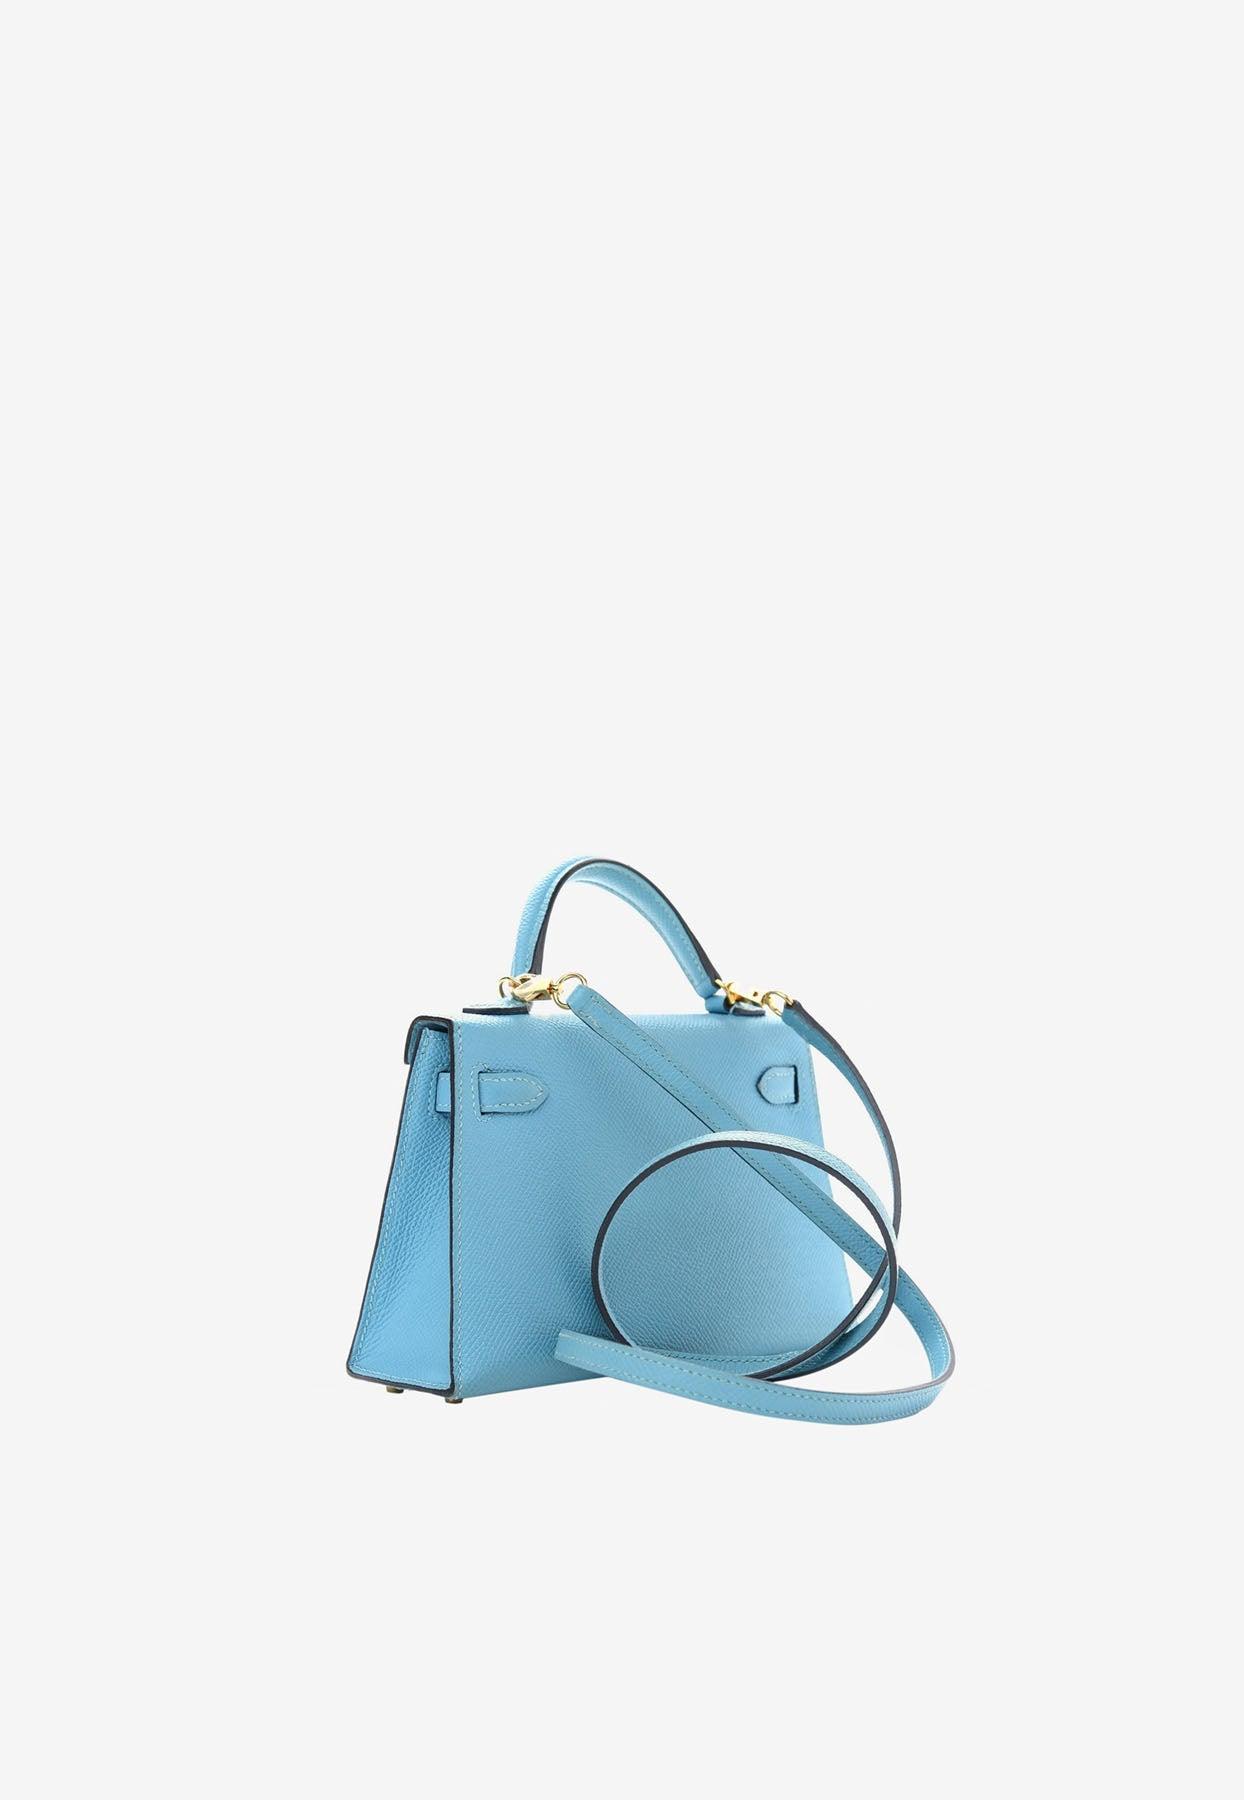 Hermès Mini Kelly Sellier 20 Top Handle Bag In Bleu Brume, Vert Jade And  Gold Epsom Leather With Palladium Hardware in Blue